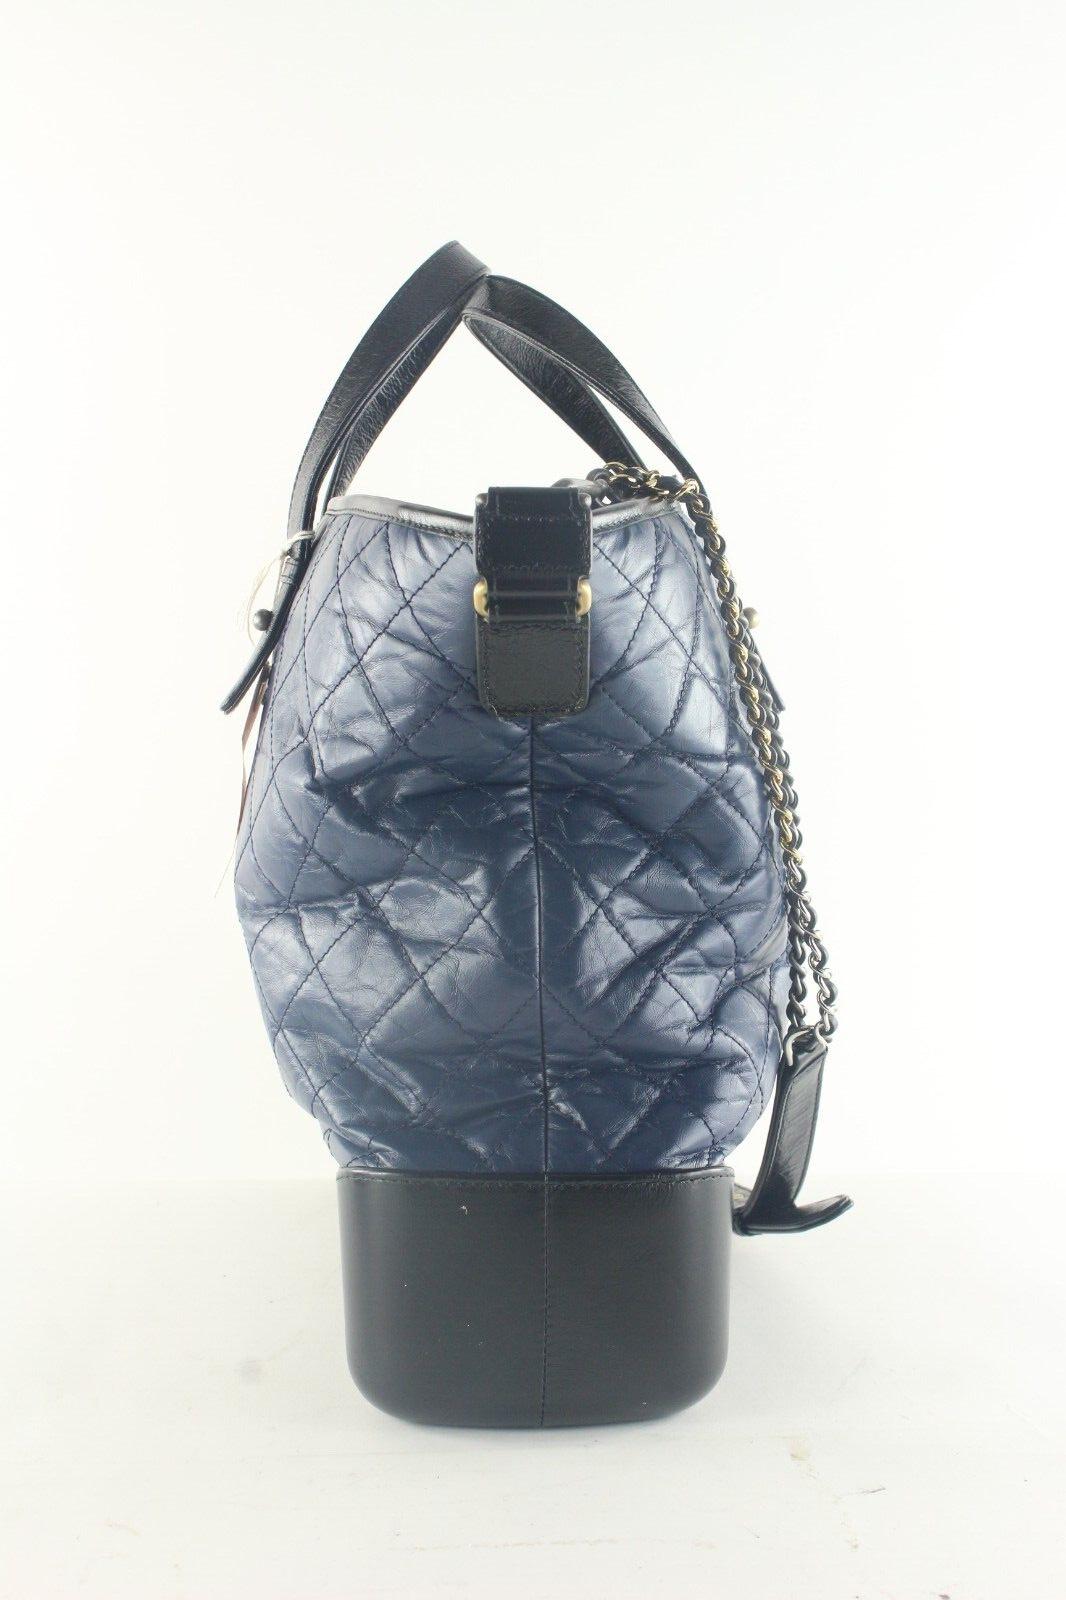 Chanel Two-Tone Quilted Black x Blue Leather Gabrielle 2way Tote 6CK103K en vente 5